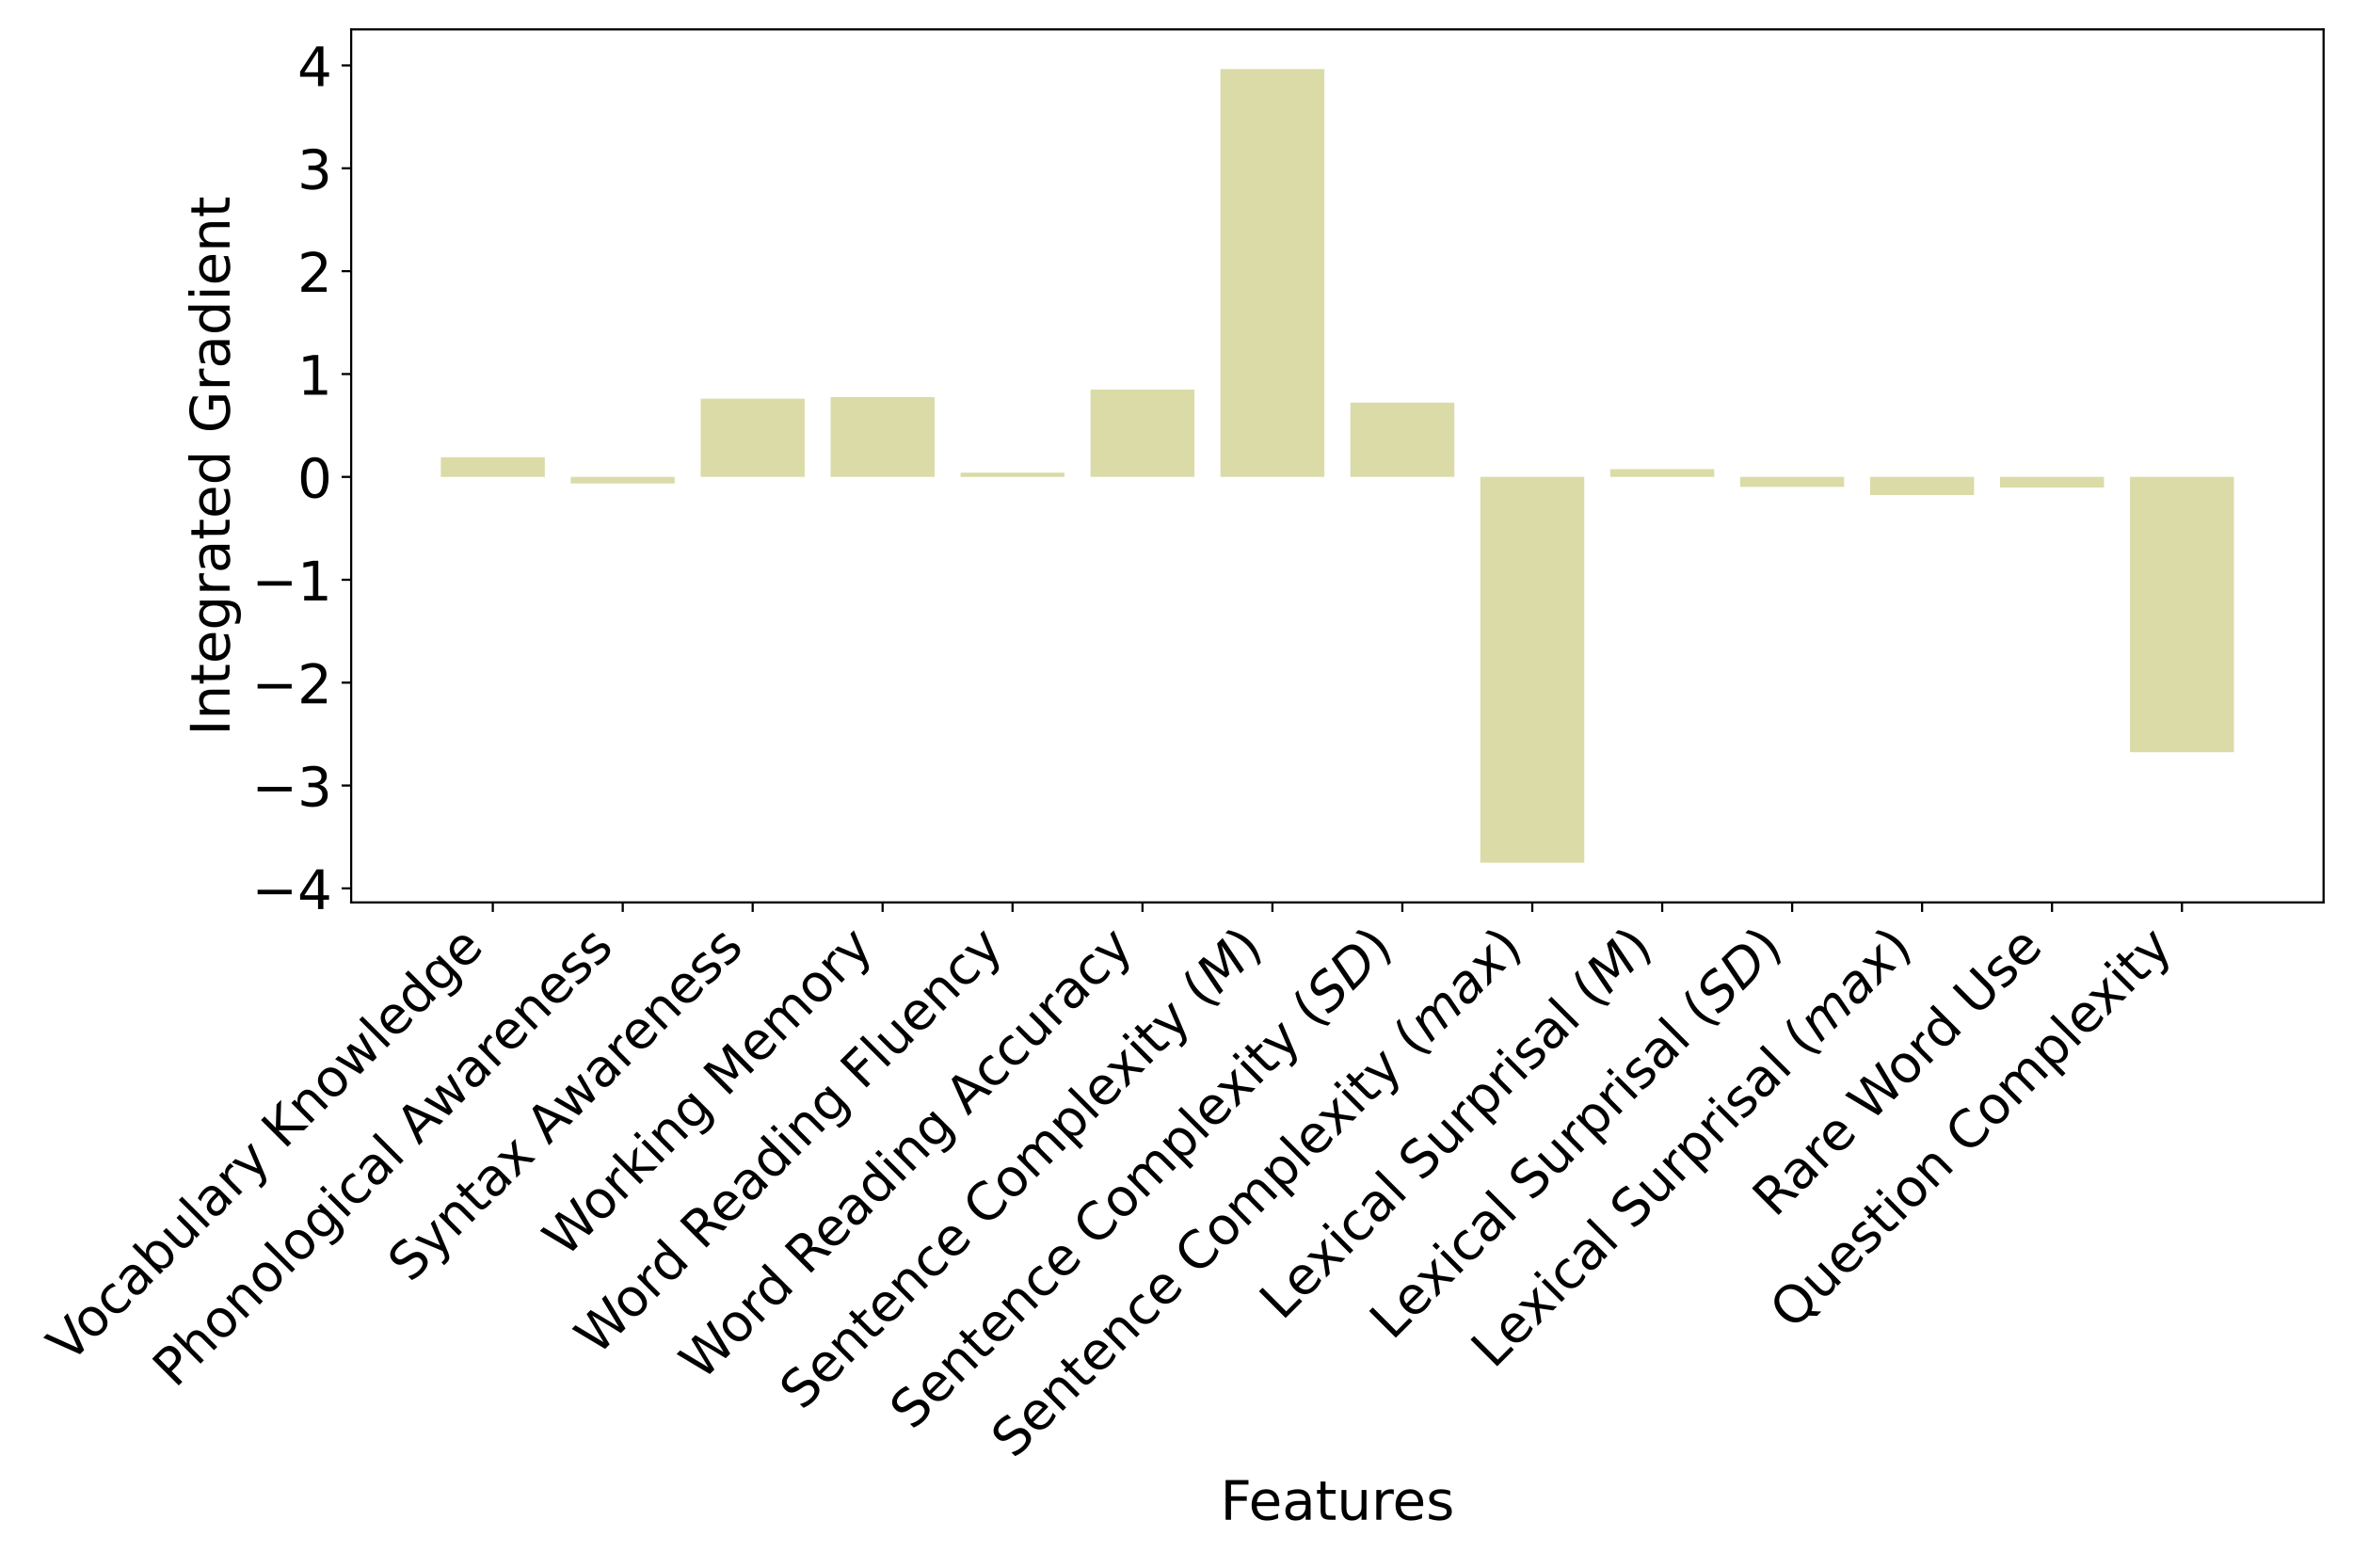 A bar chart showing integrated gradient value for each text feature in the full model.